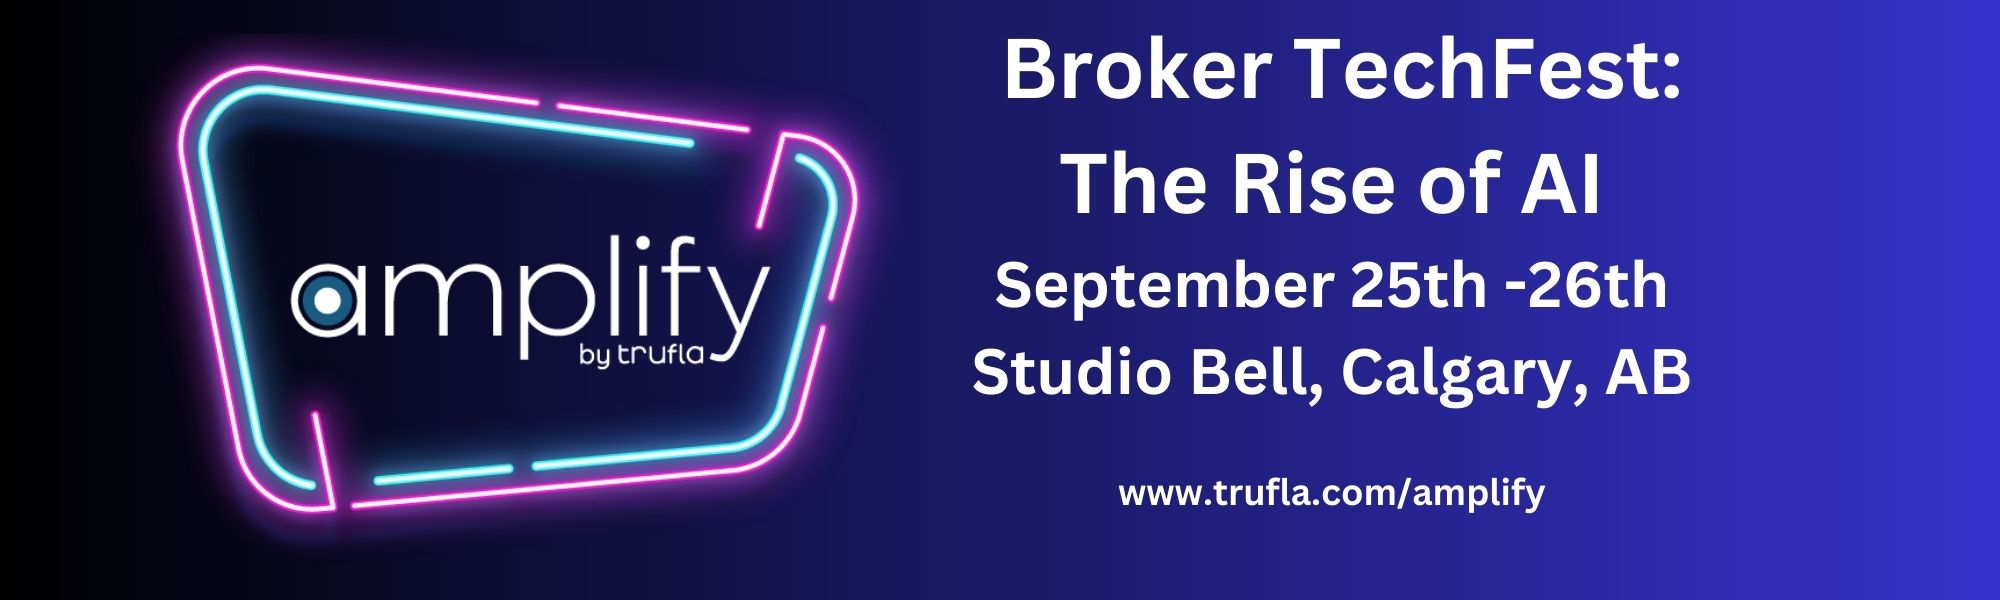 Tickets now on sale for AMPLIFY BROKER TECHFEST CONFERENCE: THE RISE OF AI